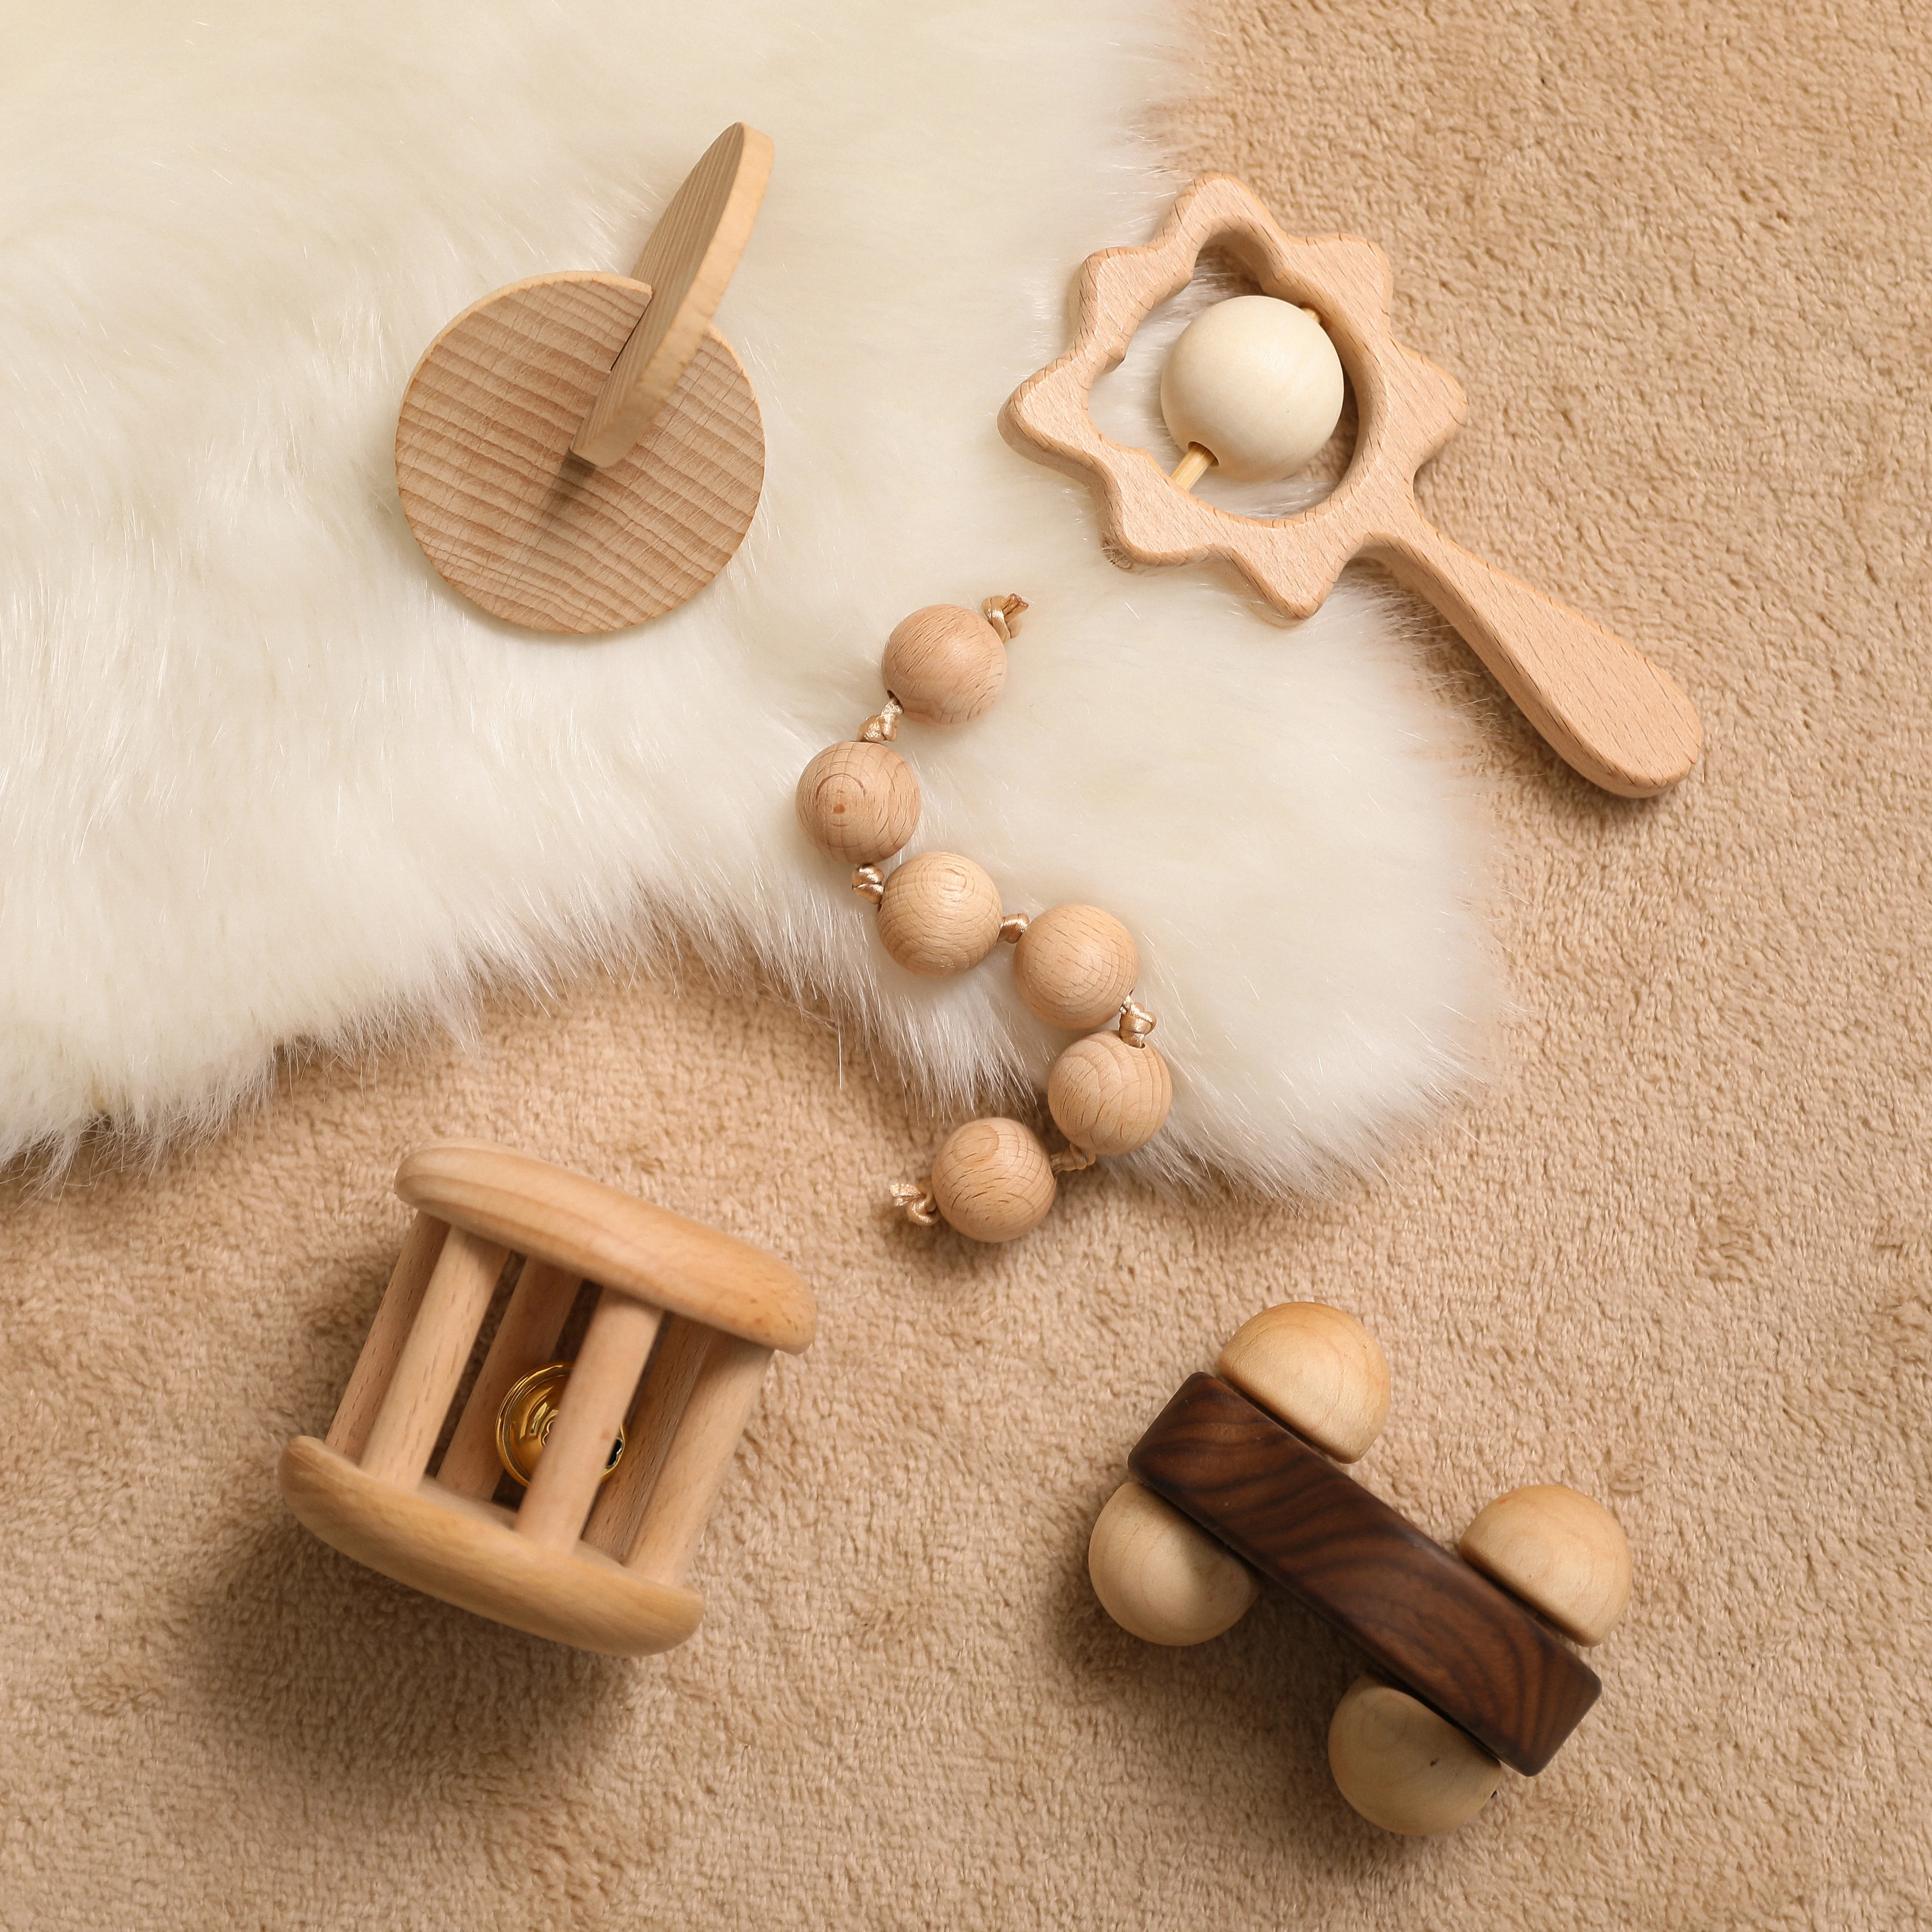 

2021 New Wooden Car Toys Set Baby Toys Rattles Bracelet Wood Teethers Montessori Toy Infant Teething Rattle Shower Gift